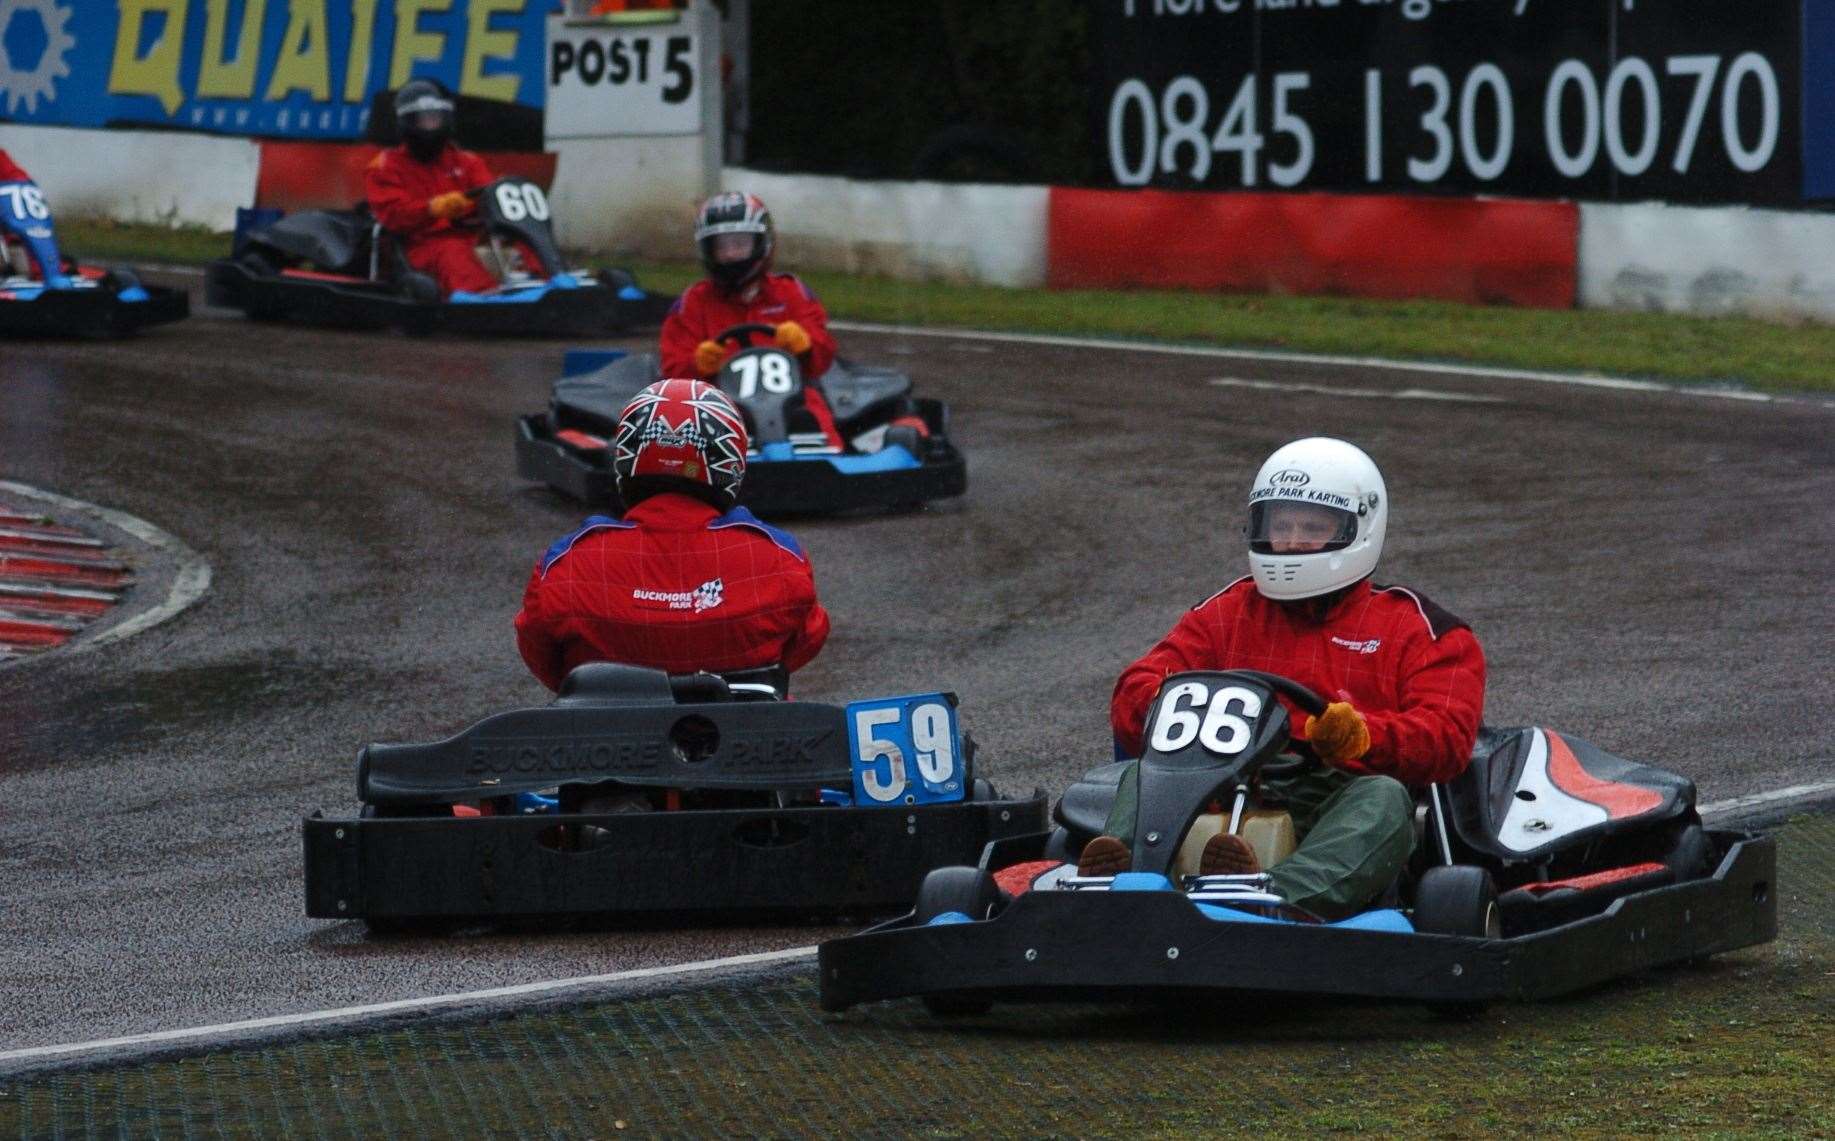 Buckmore's huge fleet of corporate karts used slick tyres in all conditions, making wet races a real challenge. Picture: Jim Rantell